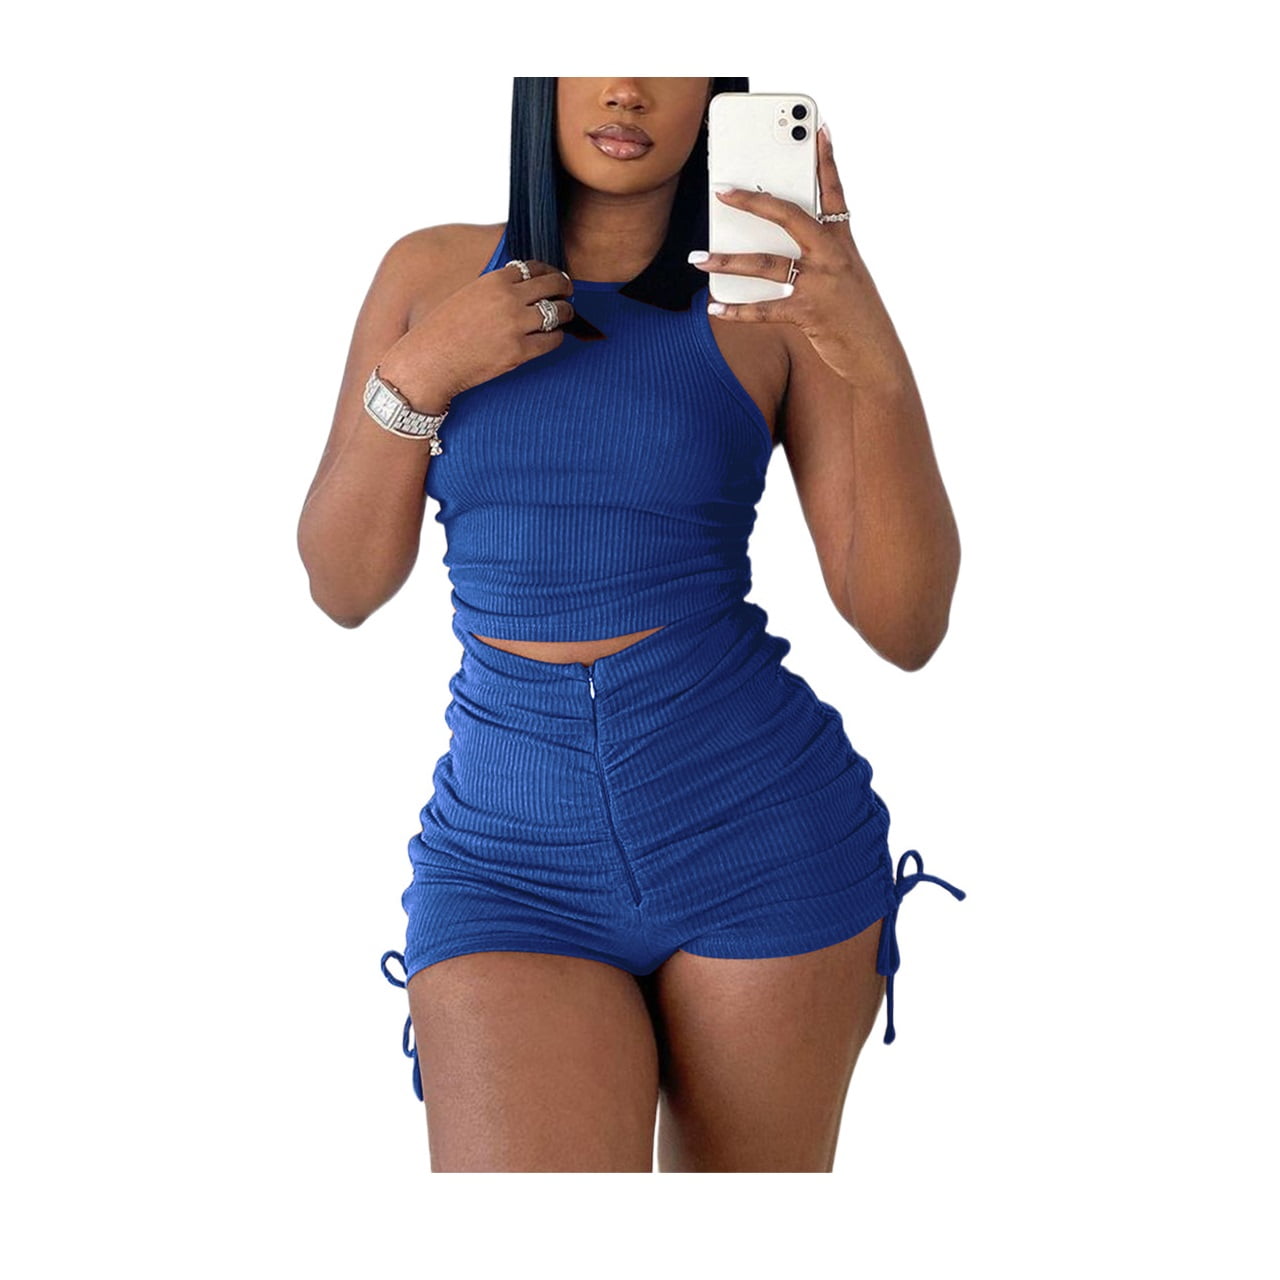 Women's Workout Sets 2 Piece Outfits Ribbed Racerback Round Neck Tank Tops  + High Waist Ruched Yoga Shorts Bodycon Gym Sets Orange - Walmart.com